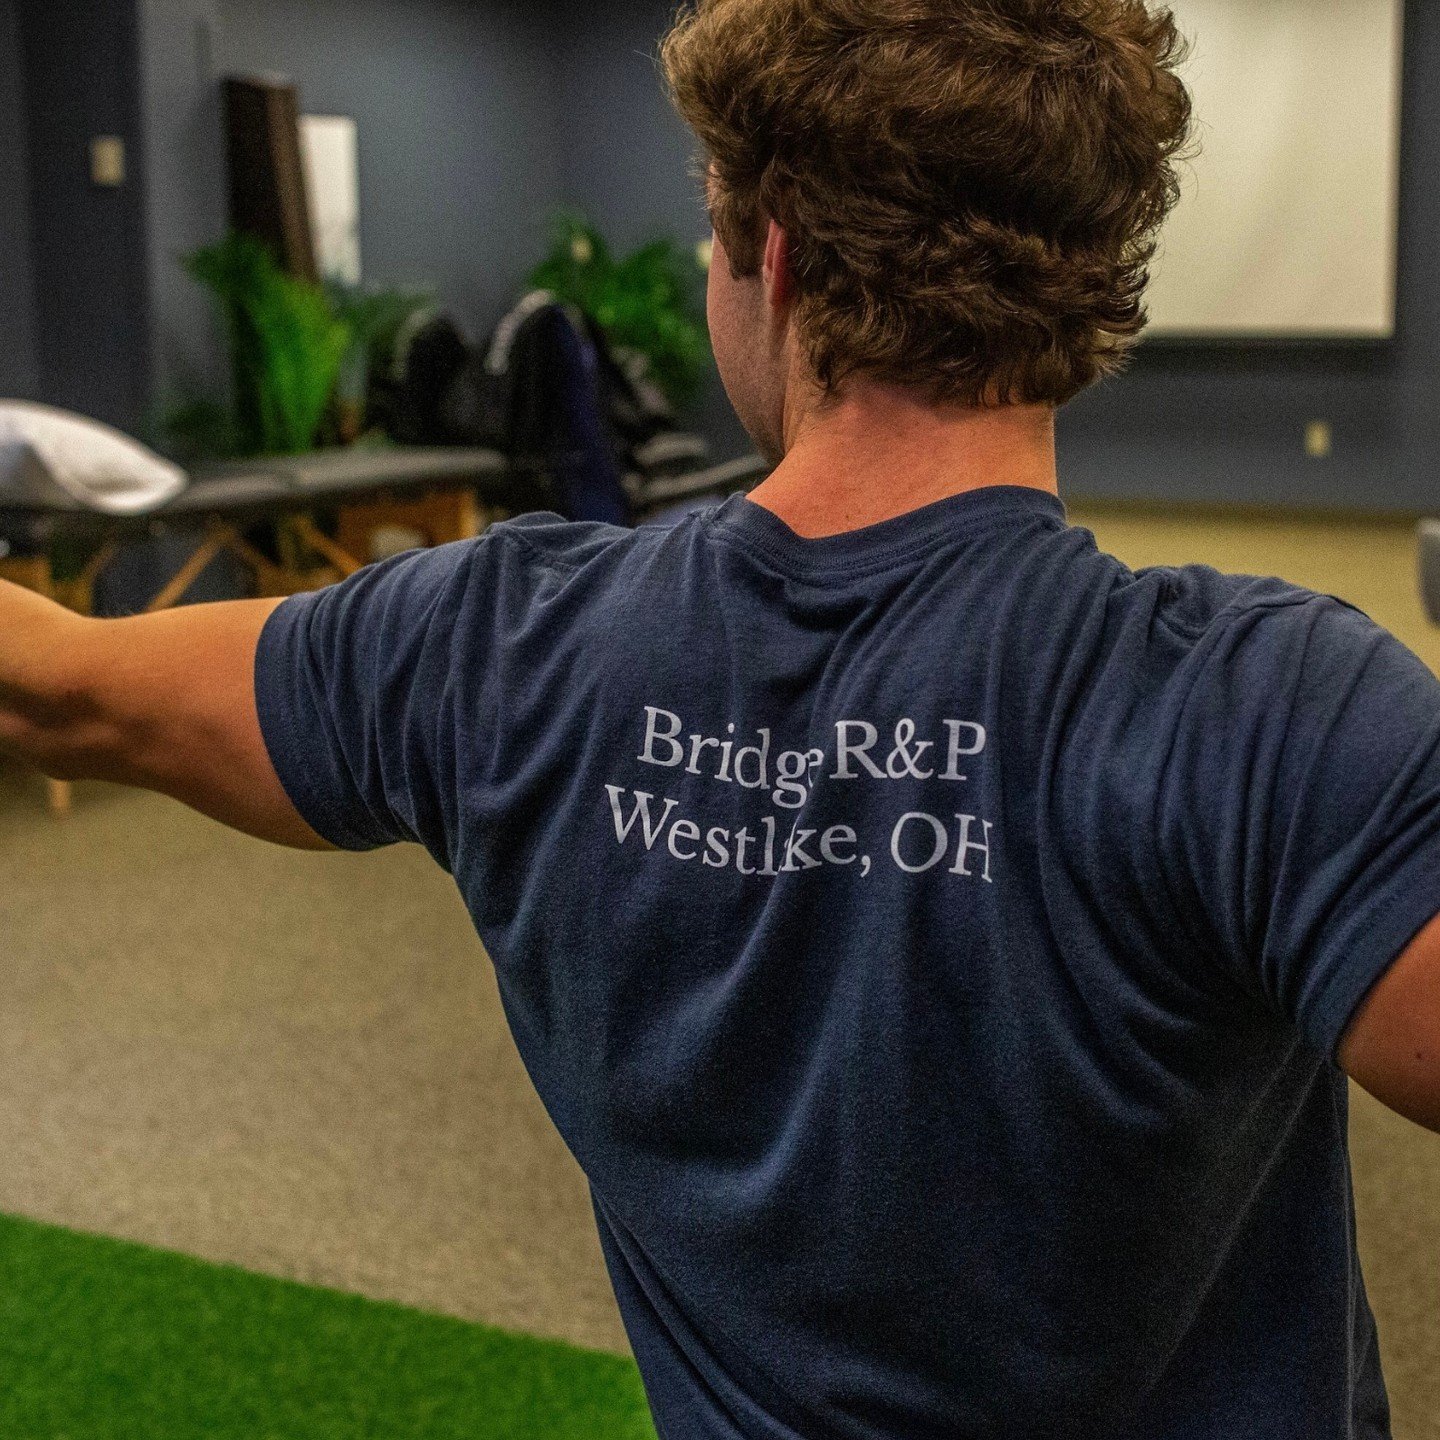 What makes Bridge Performance Physical Therapy and Training Different?👍😀

Everything we do here is centered around YOU, the athlete. 

Seeing you perform at your highest potential just lights us up inside:)

However, we also want to see you perform